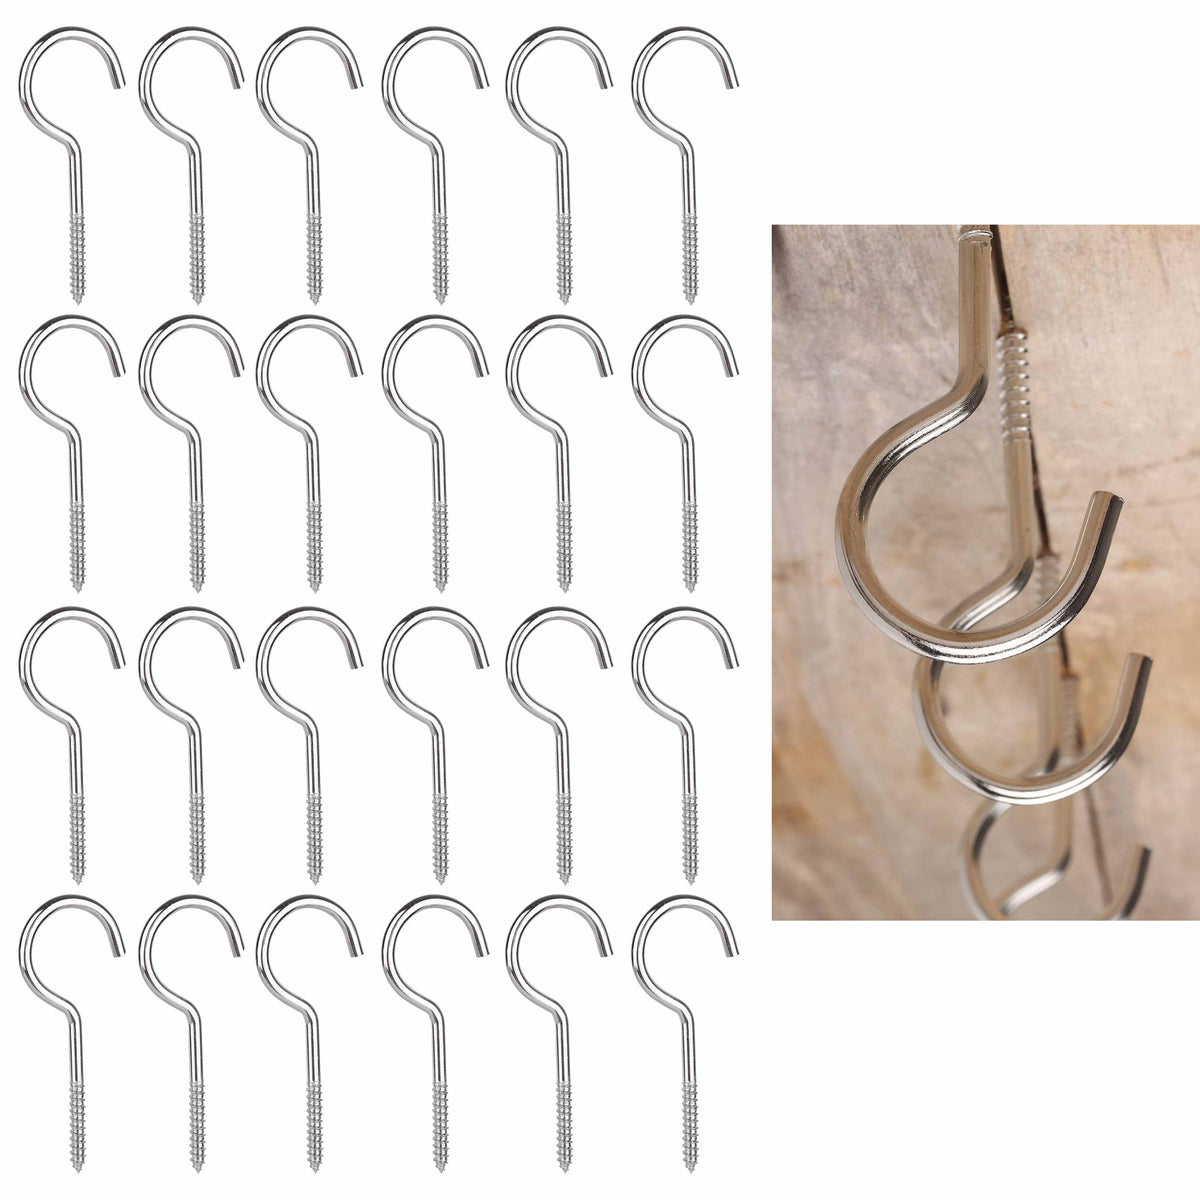 14 X Assorted Screw Eye Utility Hooks Steel Picture Wall Hanging Ceiling  3-2.5 